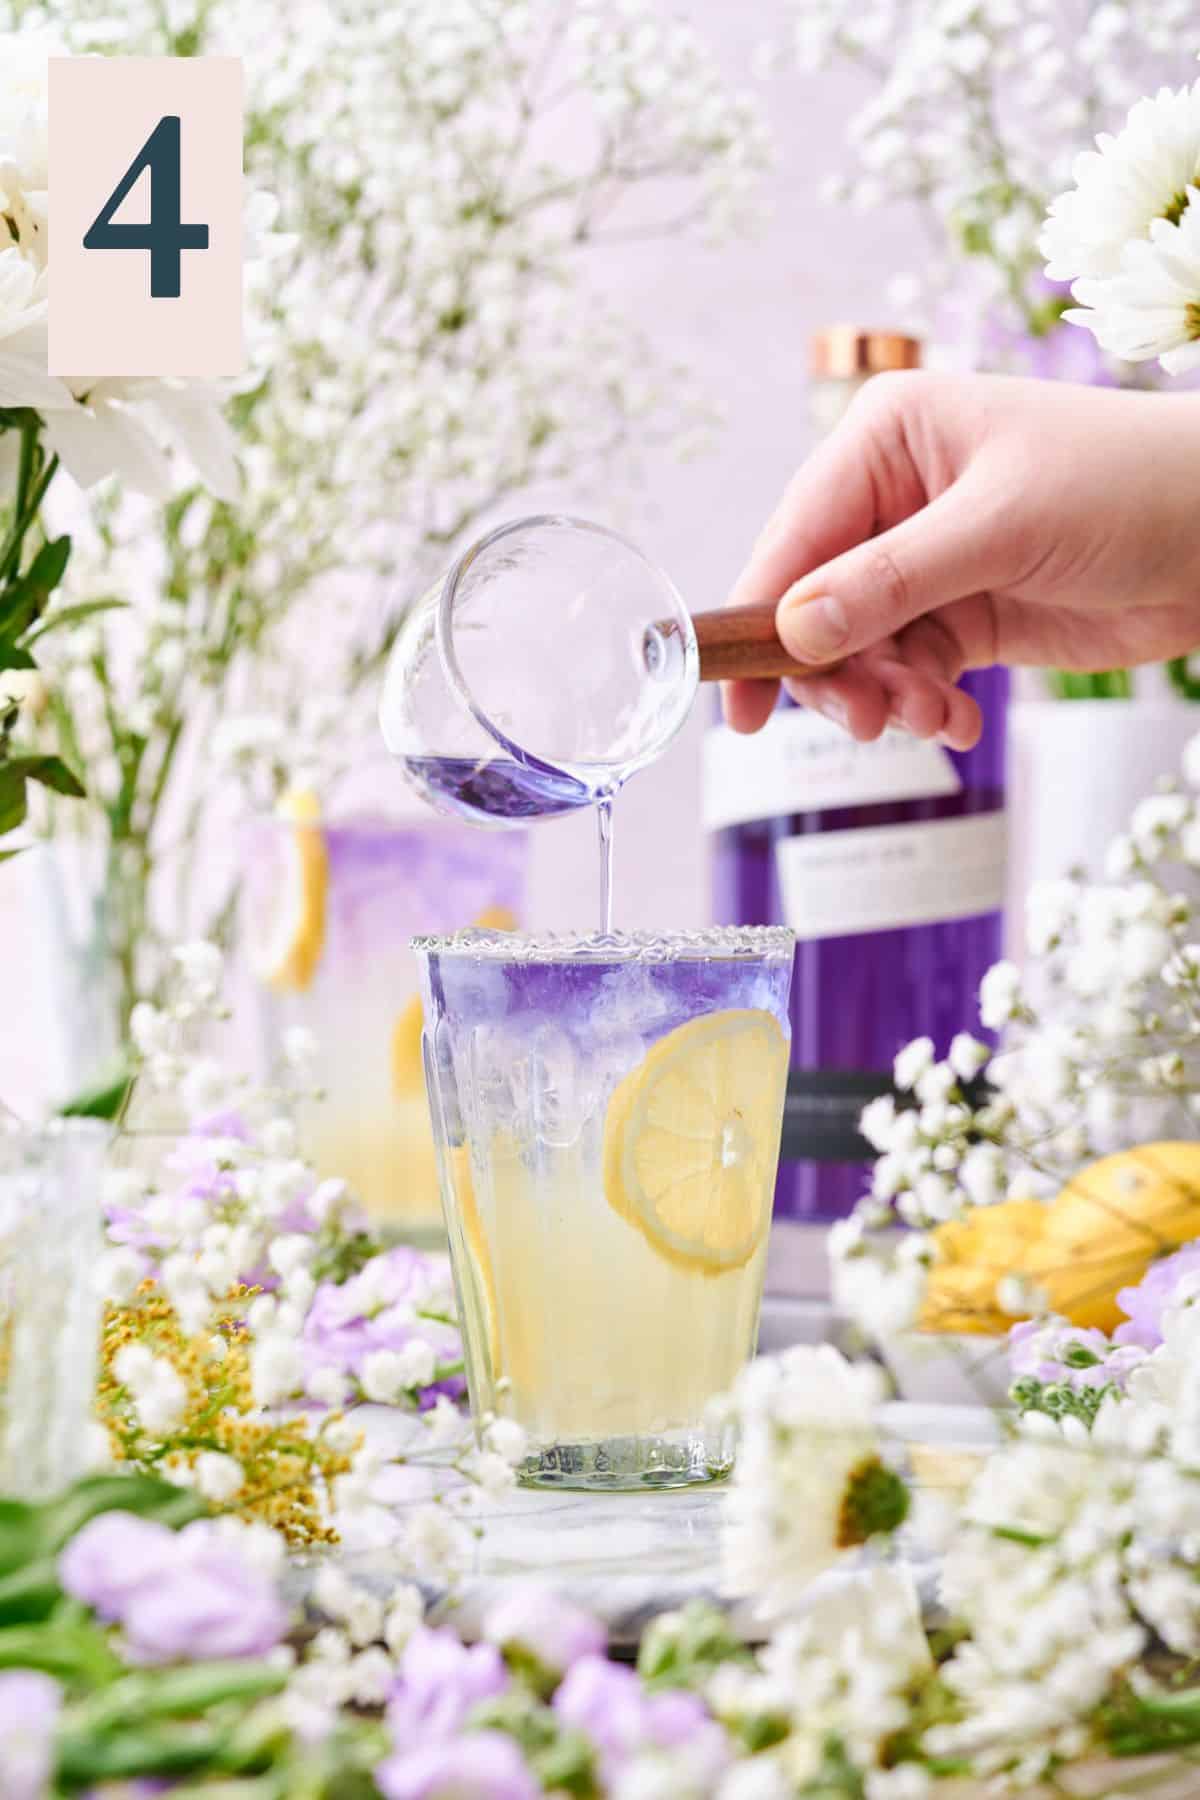 hand pouring purple Empress gin into a glass with lemon wheels and ice surrounded by lots of white and purple flowers.